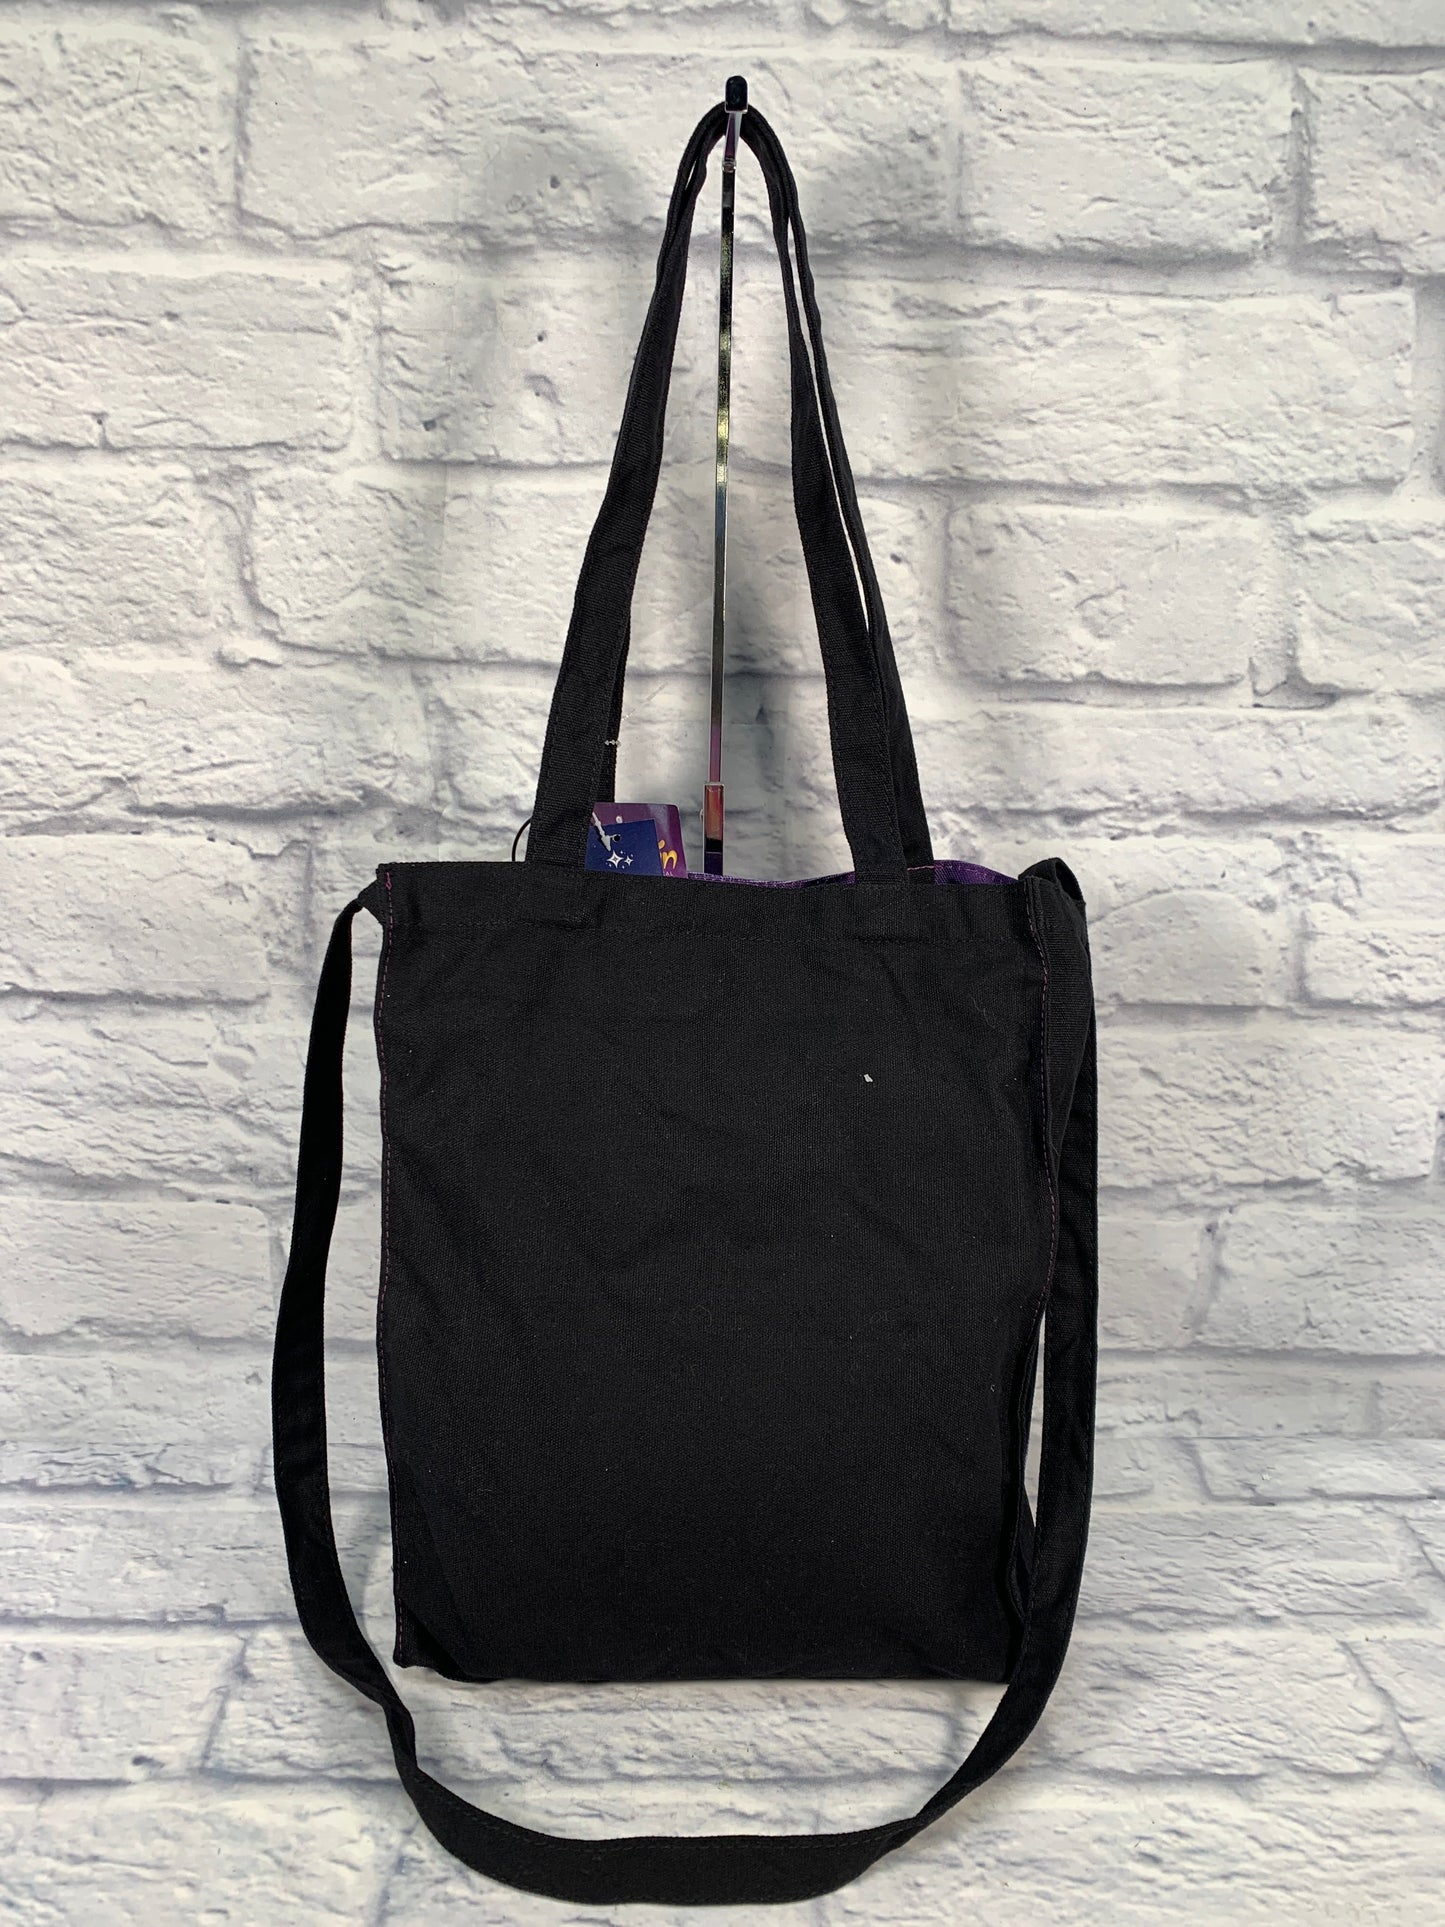 Tote By Disney Store  Size: Medium